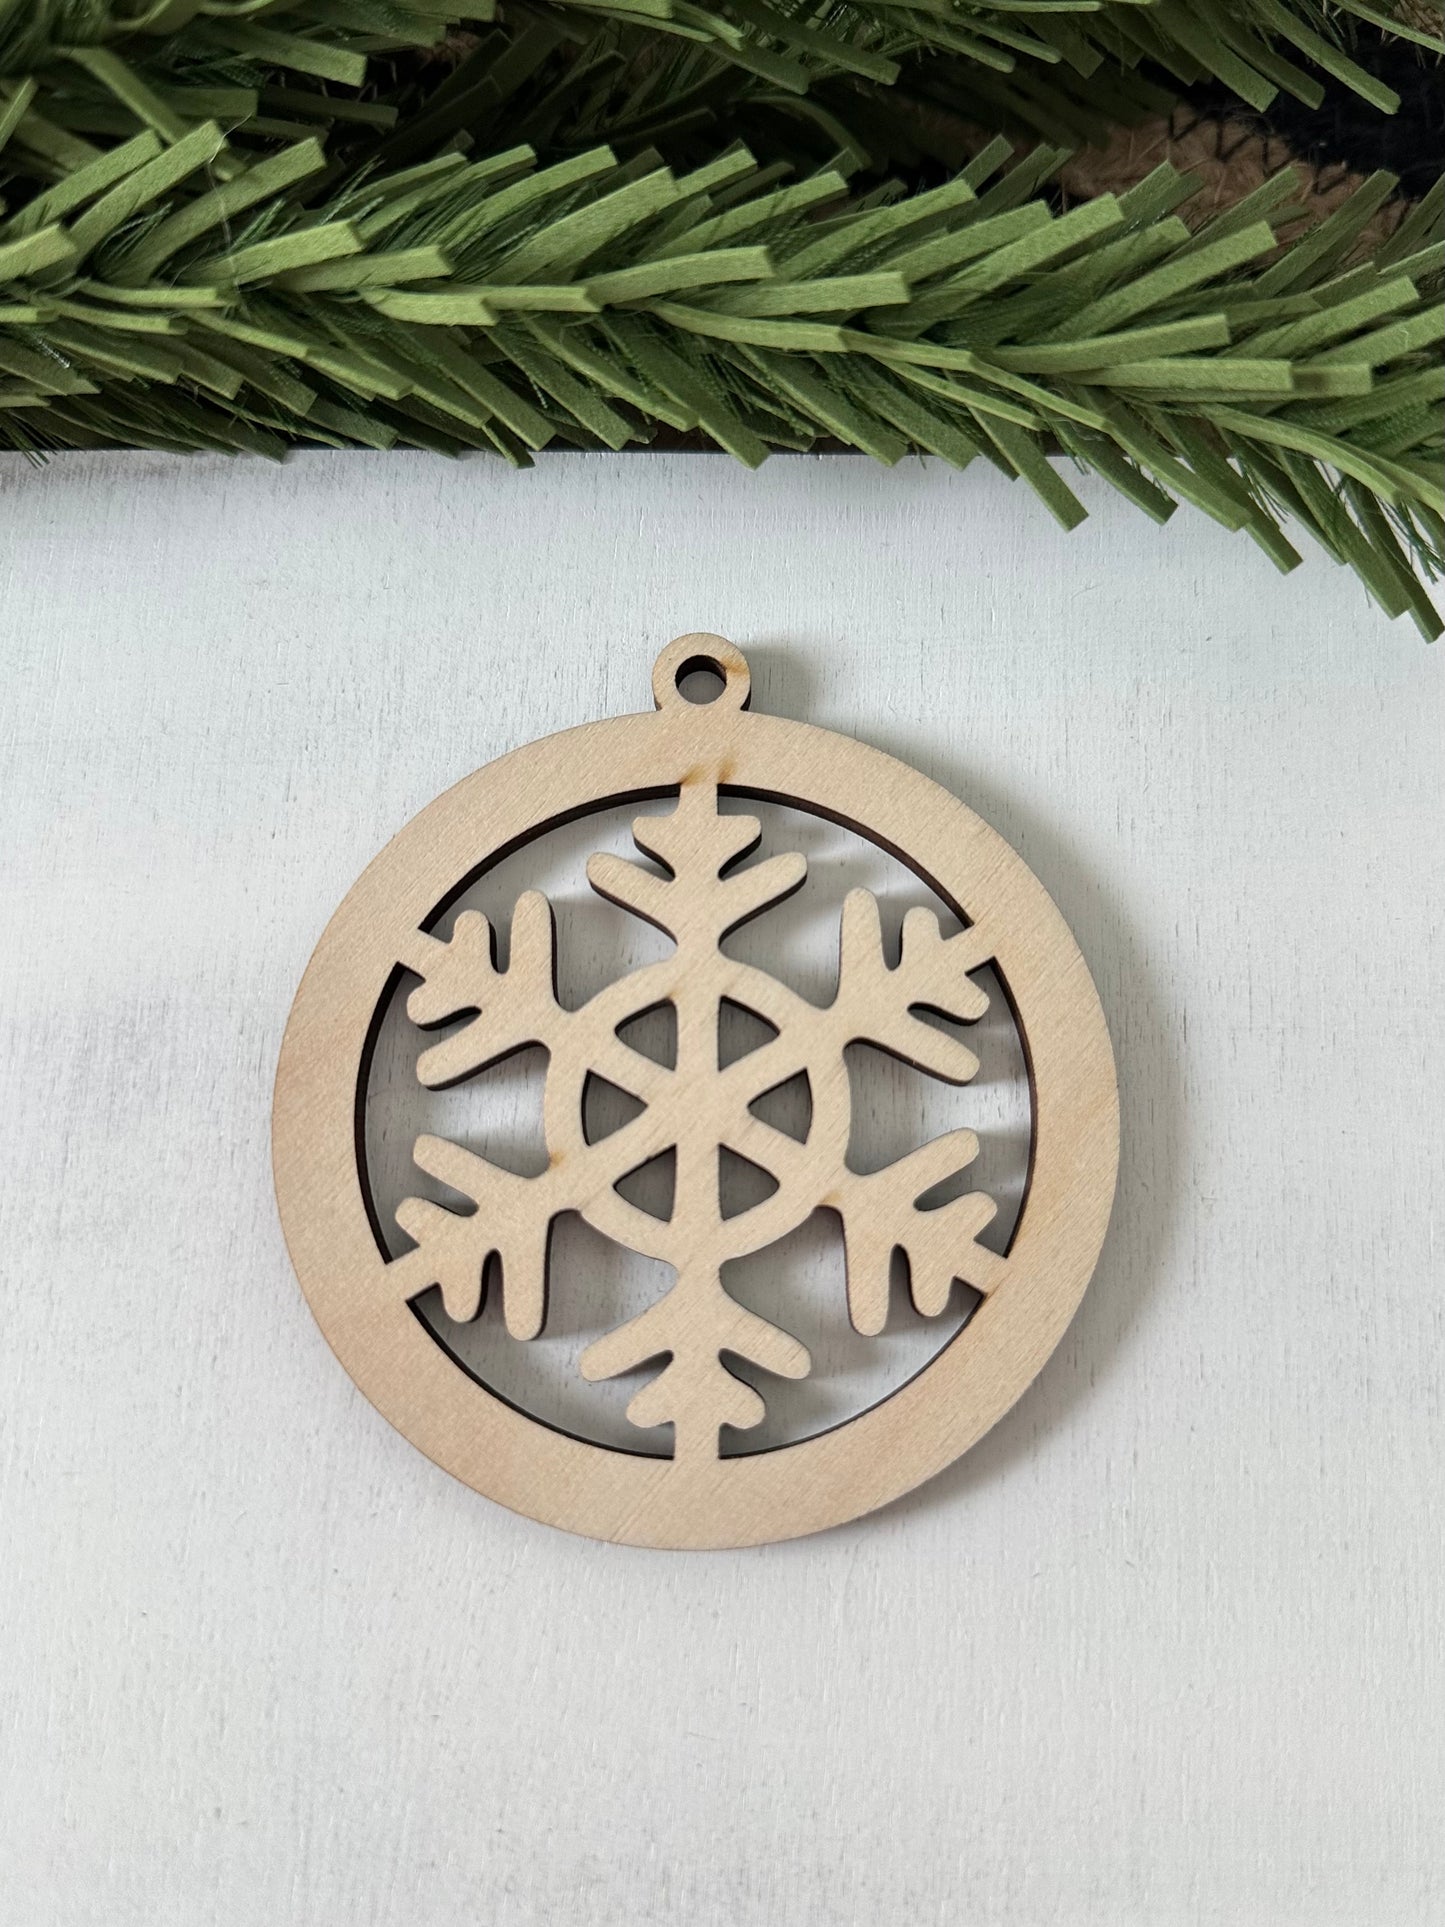 Snowflake Wood Ornaments - UNFINISHED